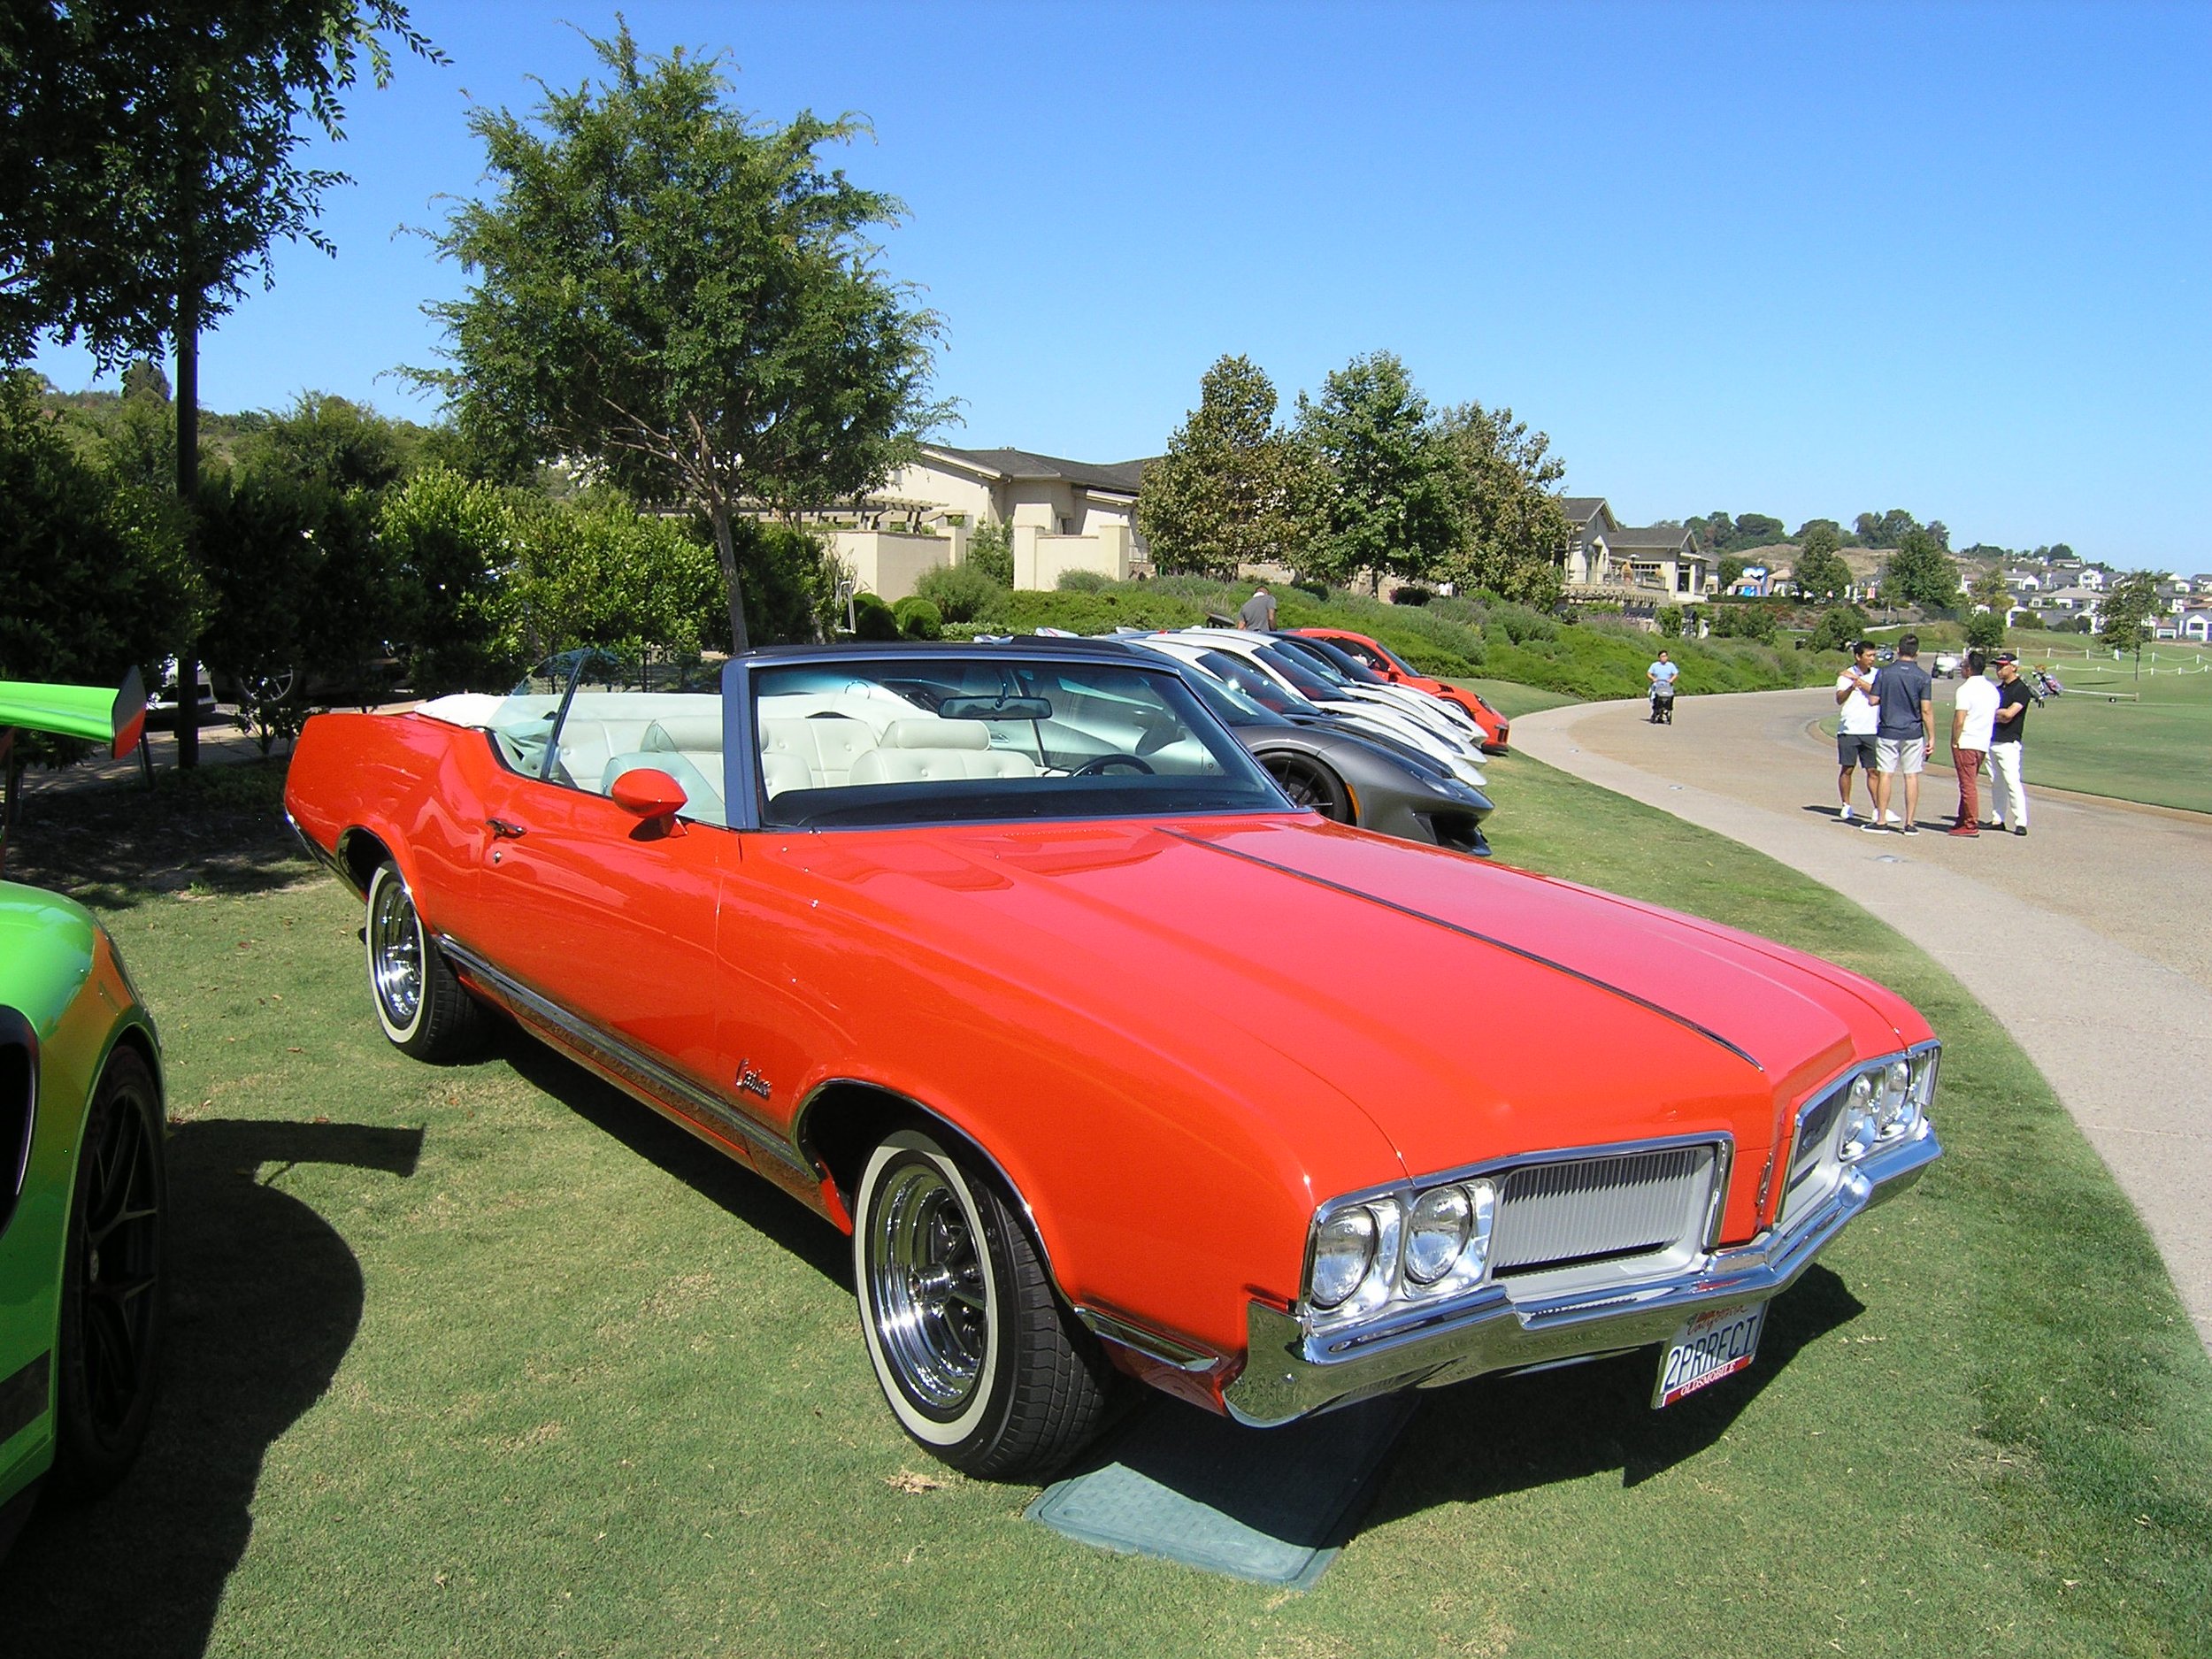 Probably the best 1970 Olds Cutlass Supreme you'll ever see